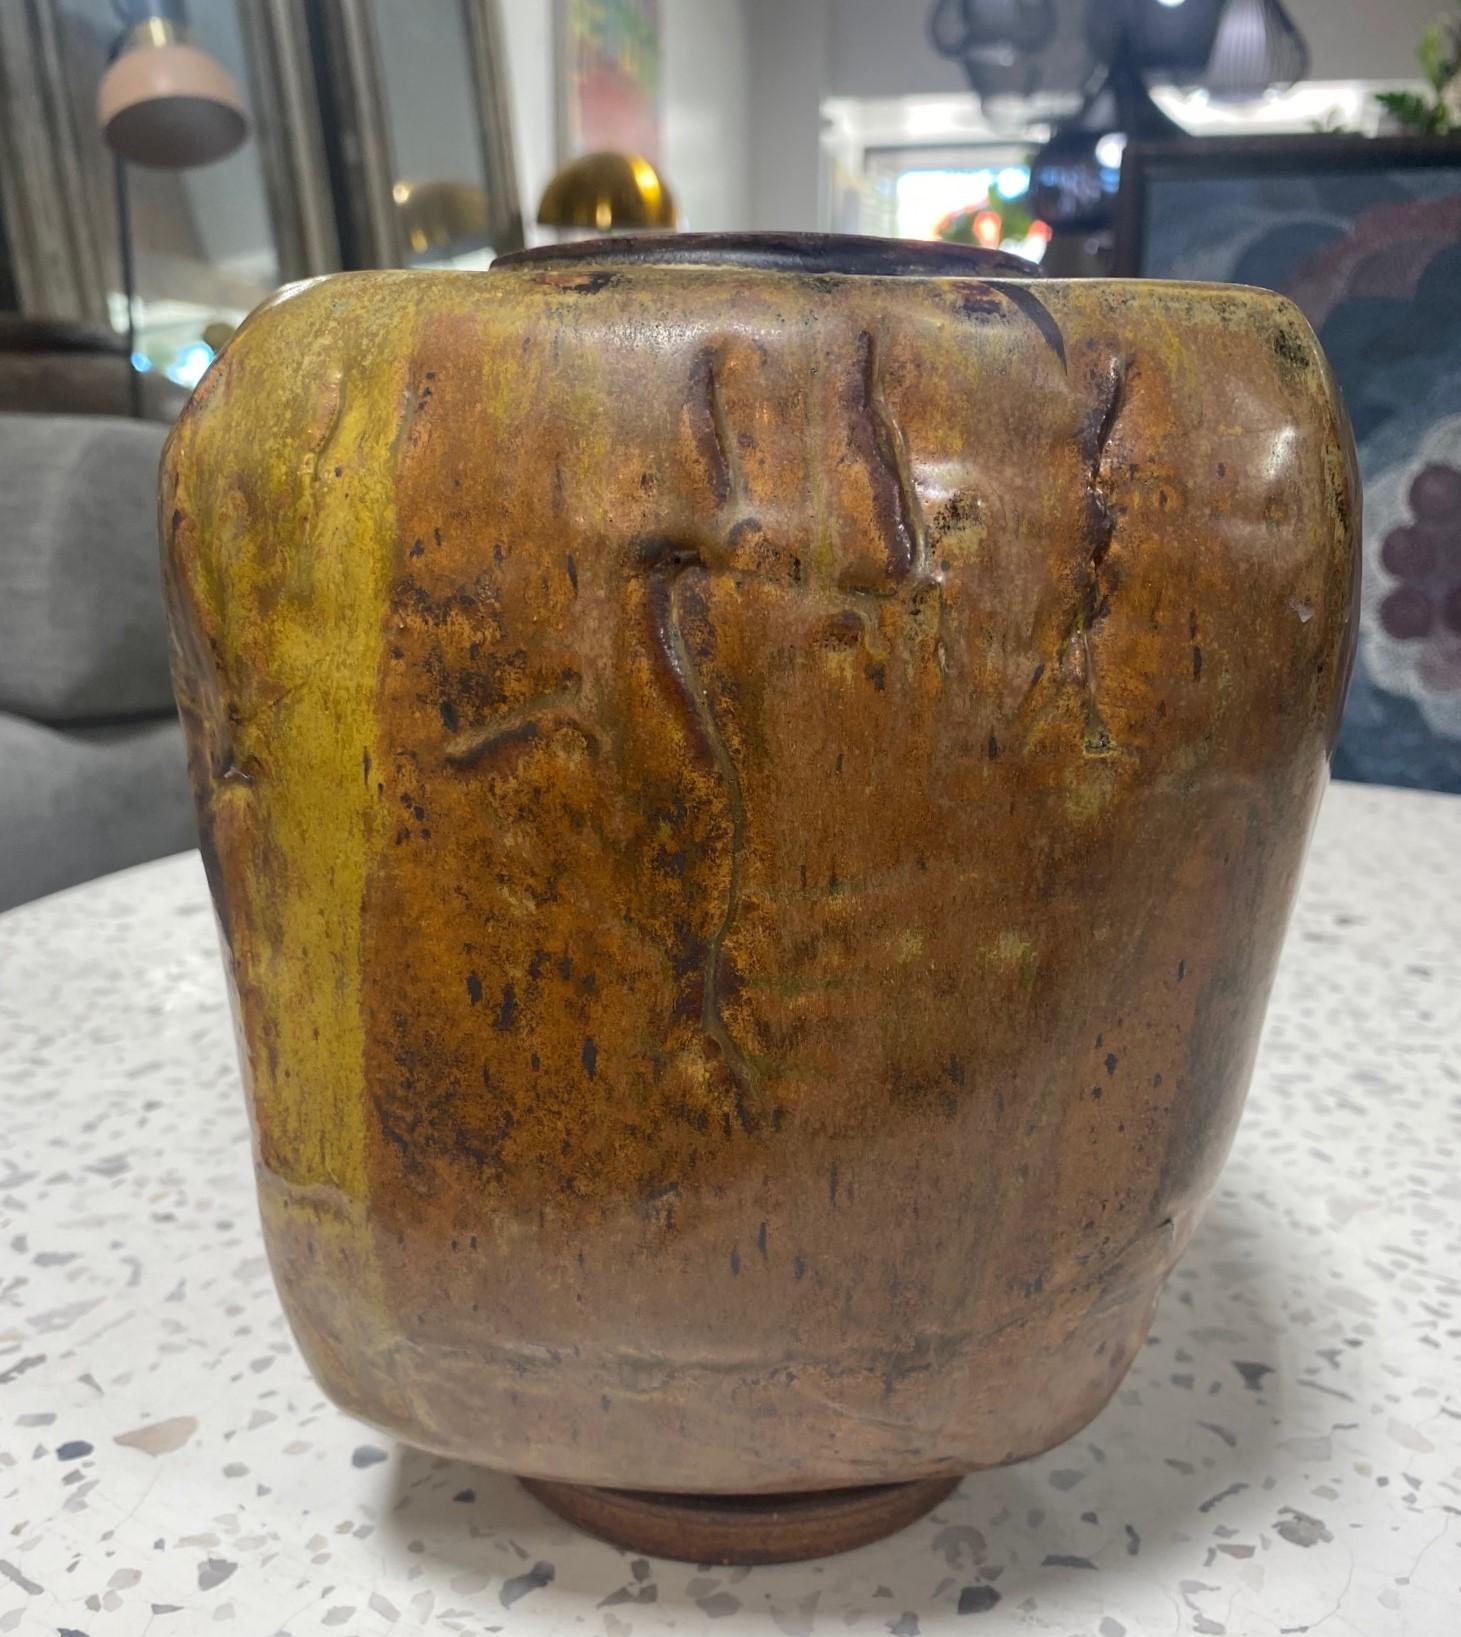 A wonderfully designed, quite heavy brutalist sculptural vase by famed American California potter, Joel Edwards. This piece features a sumptuous glaze of varying dark and shimmering colors.  

Edwards was a student of Peter Voulkos at Otis. He also